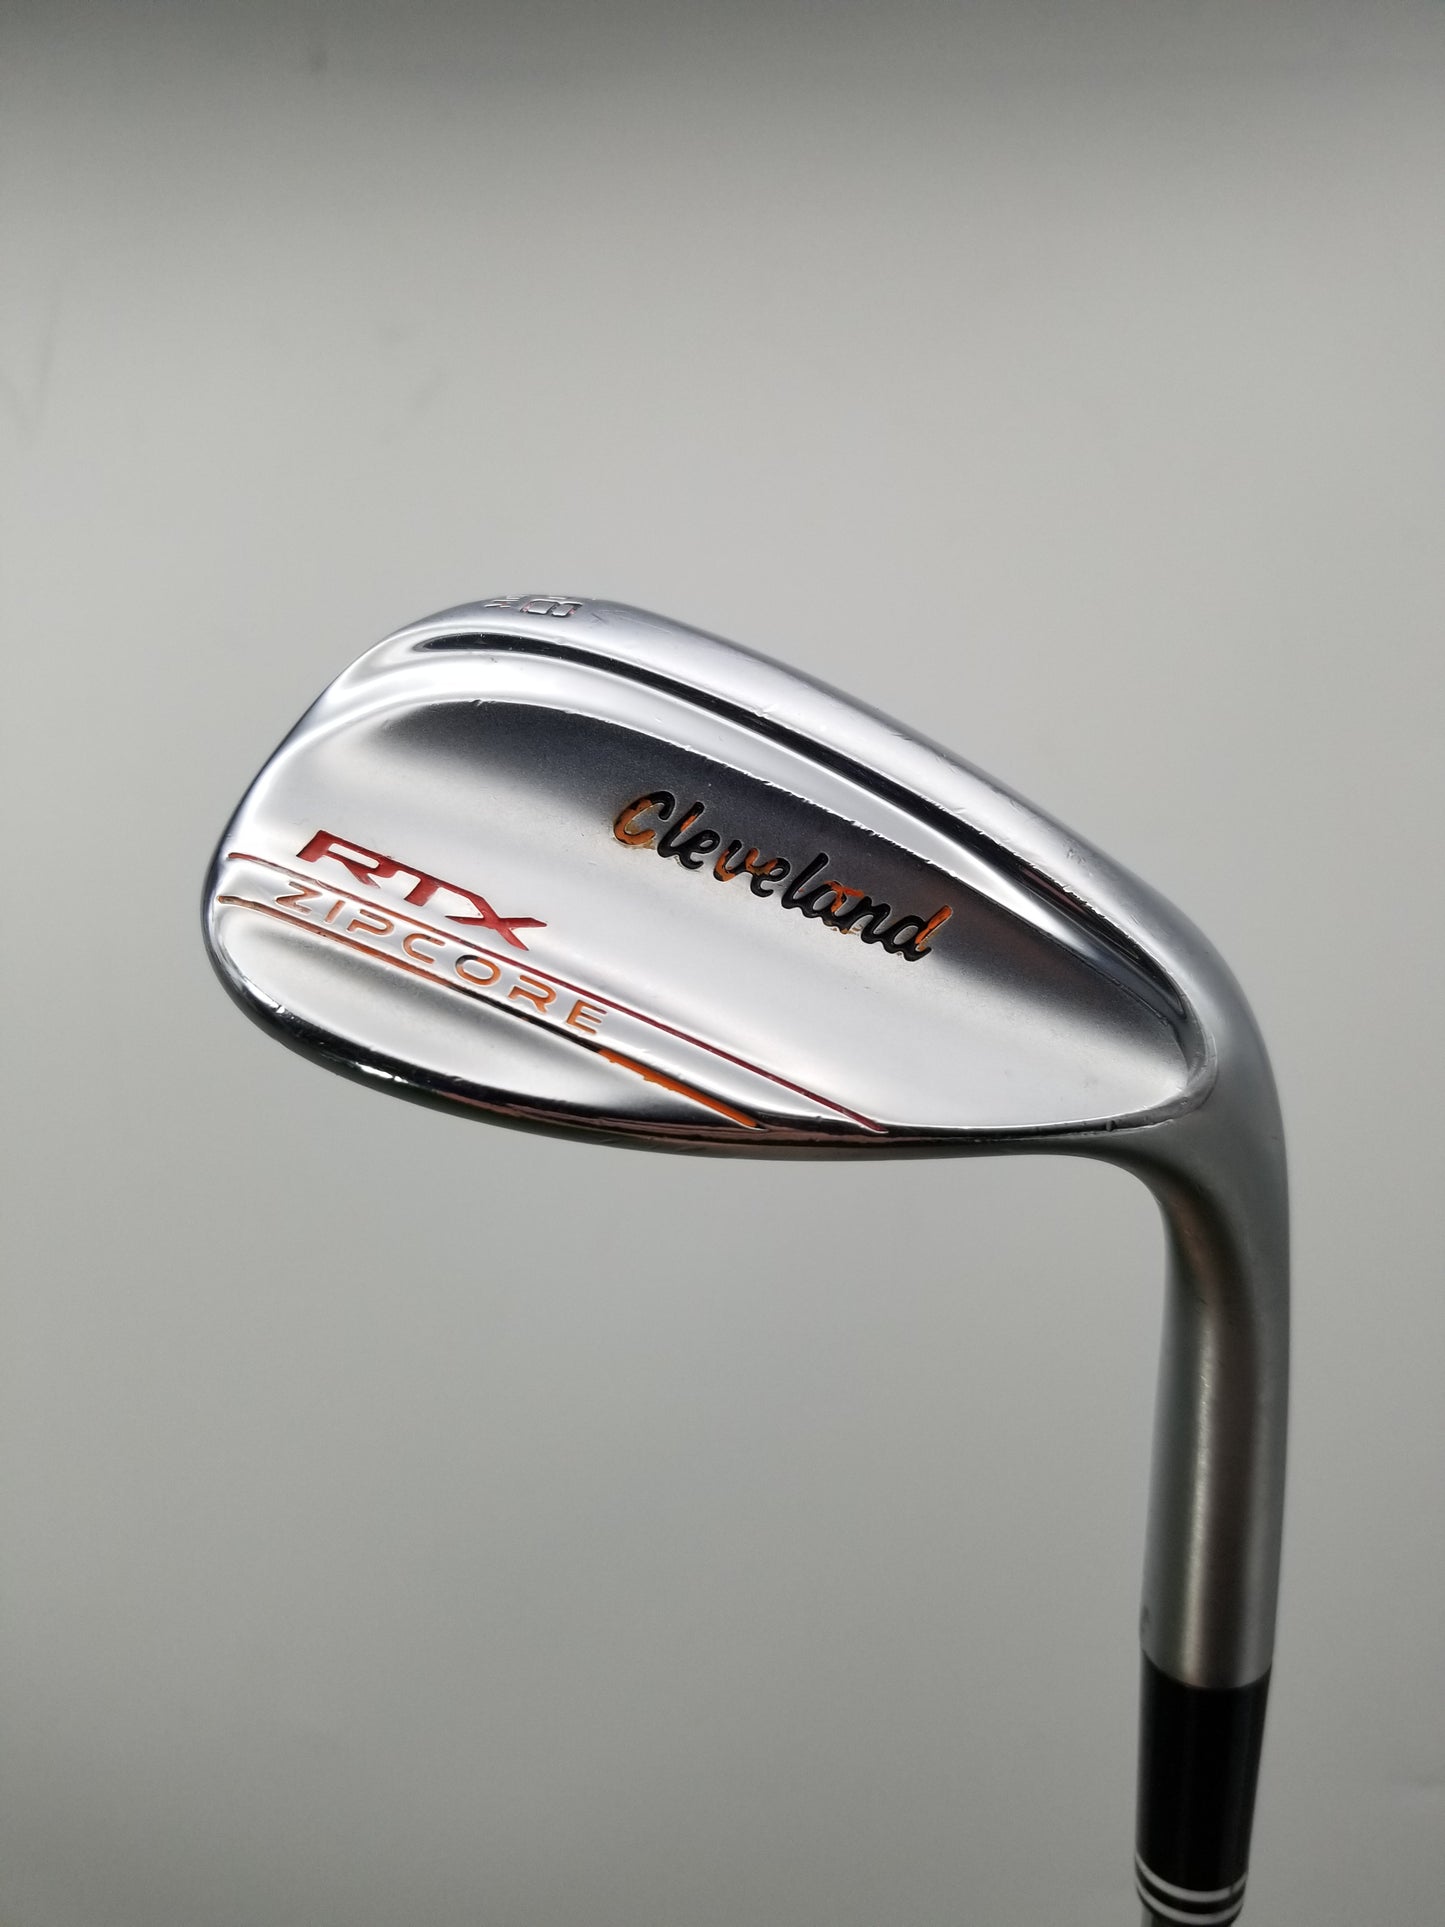 2021 CLEVELAND RTX ZIPCORE WEDGE 58*/6 TT DYNAMIC GOLD TI SPINNER 35.5" VERYGOOD